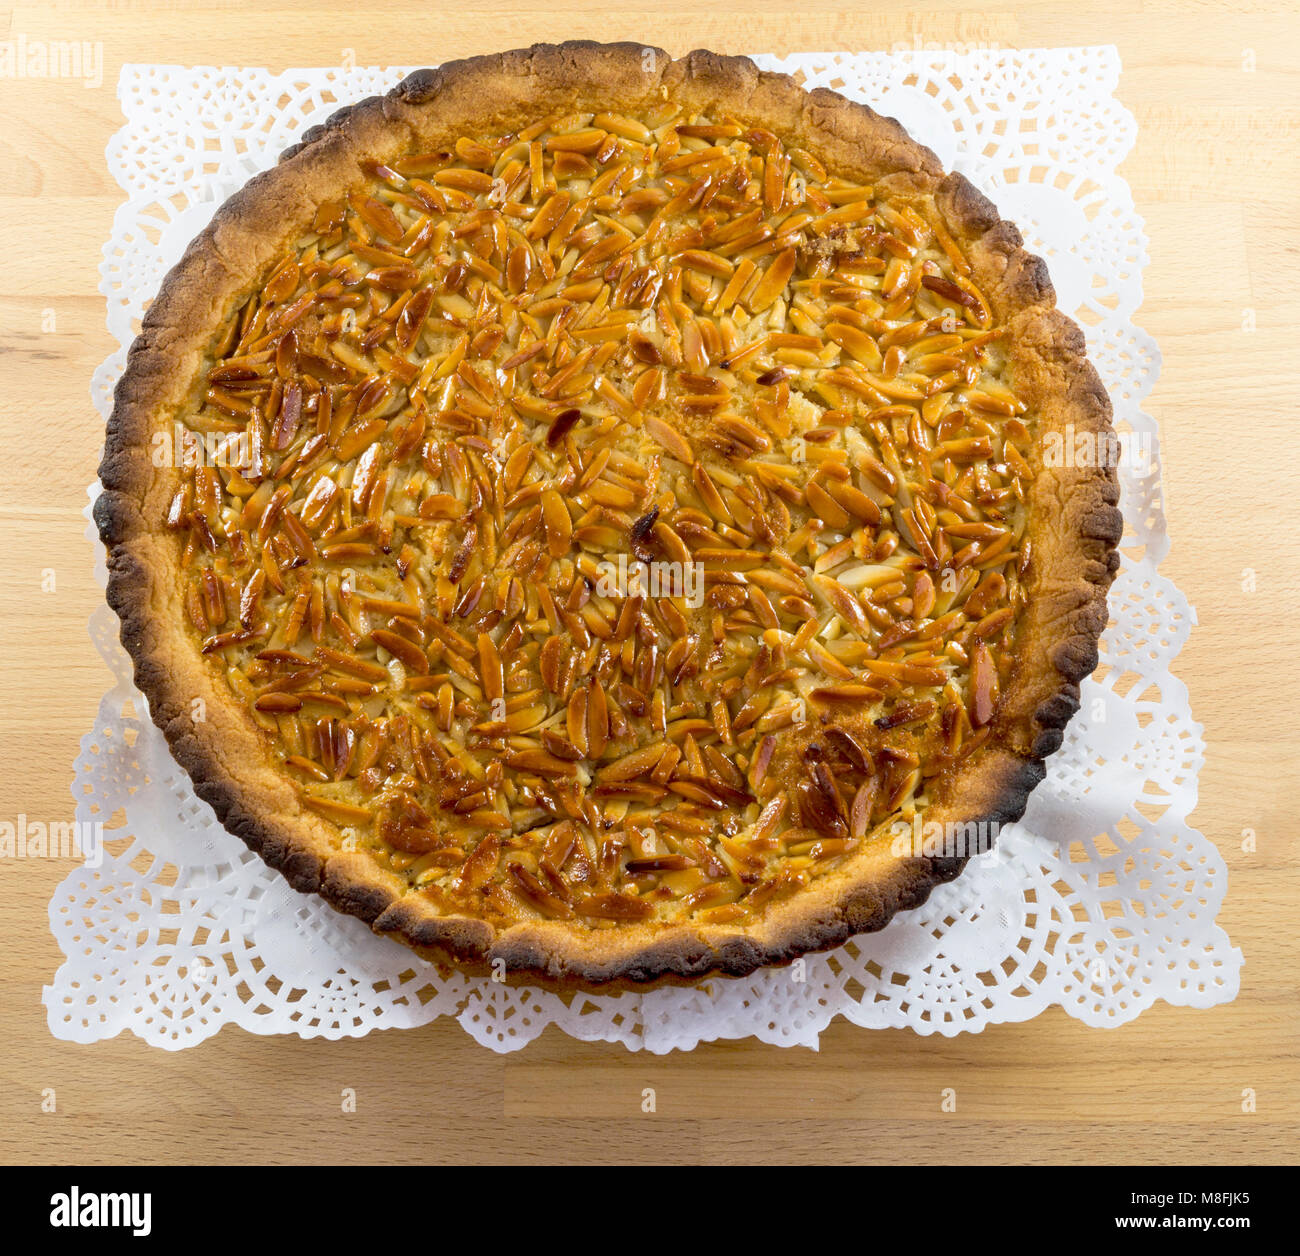 Delicious almond tart with thin crust and caramelized top. Stock Photo